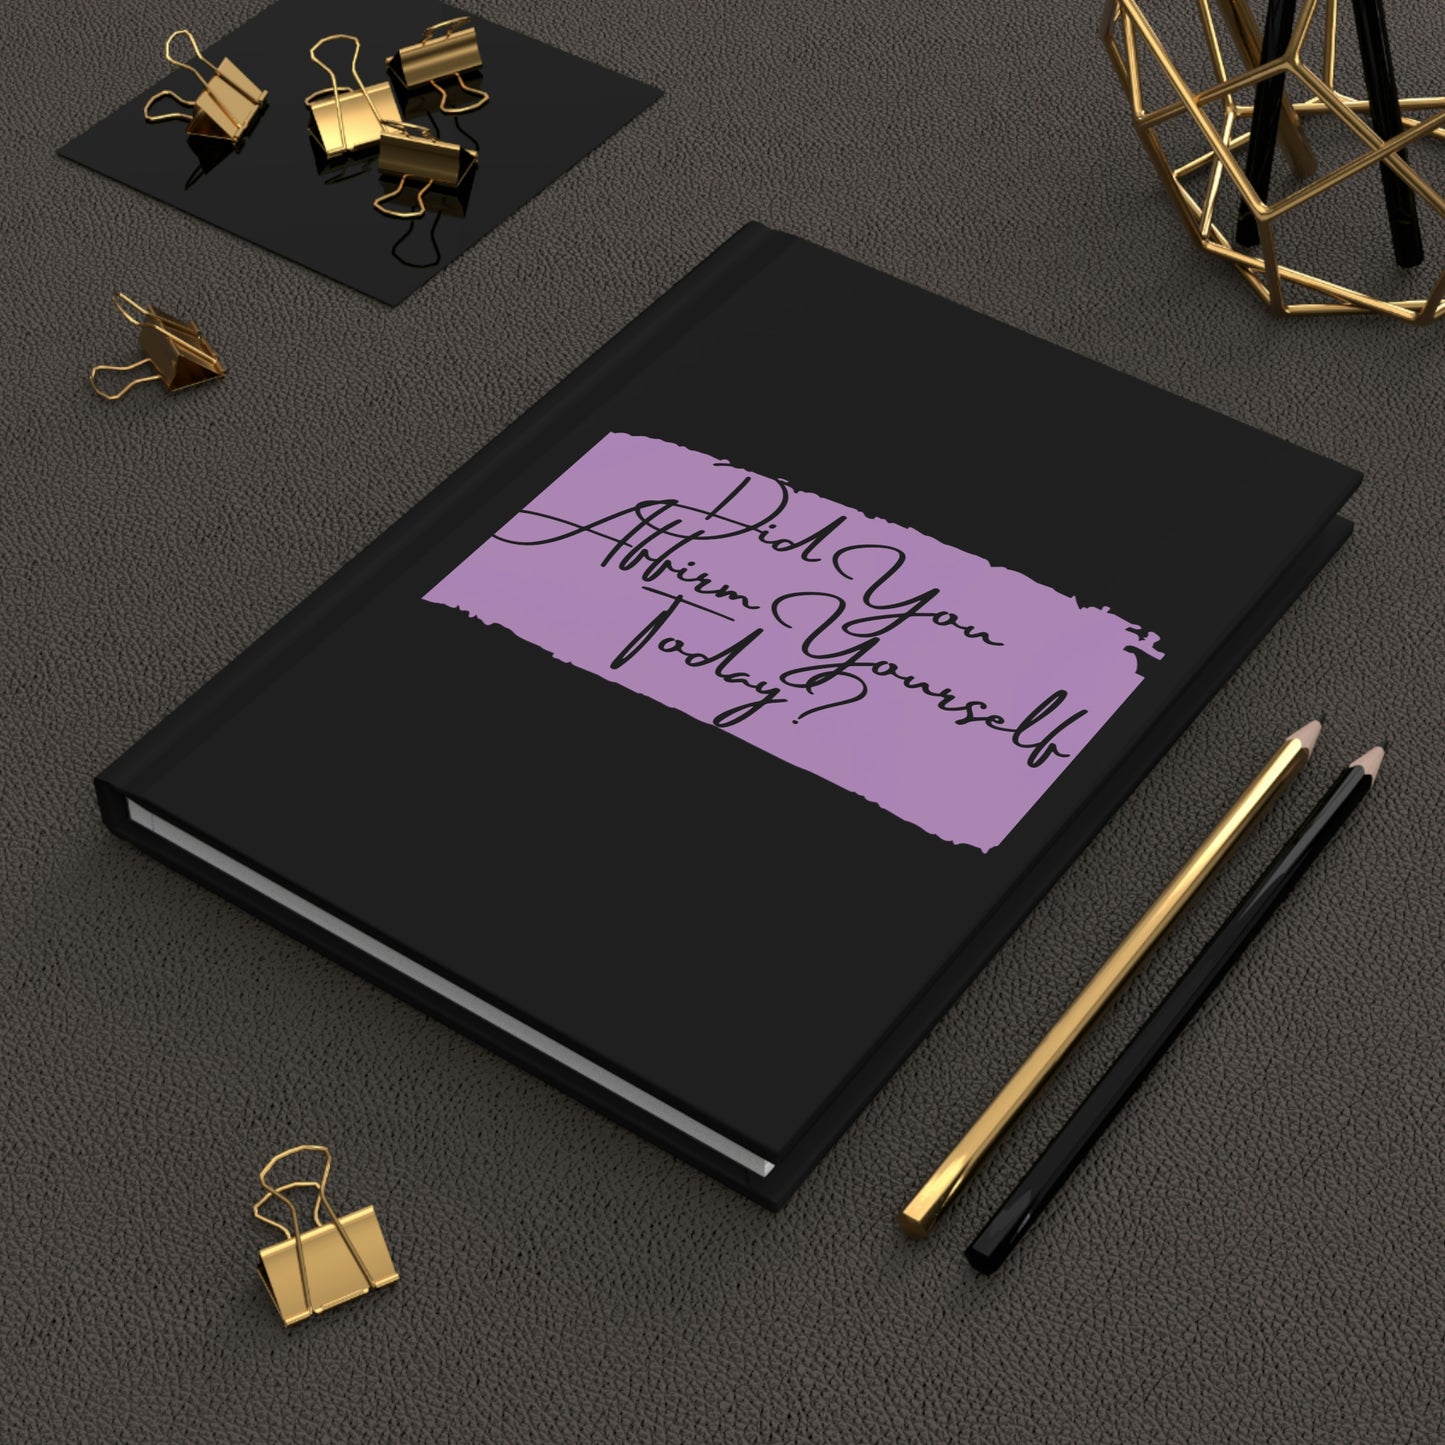 "Affirm Yourself" Hardcover Journal Matte